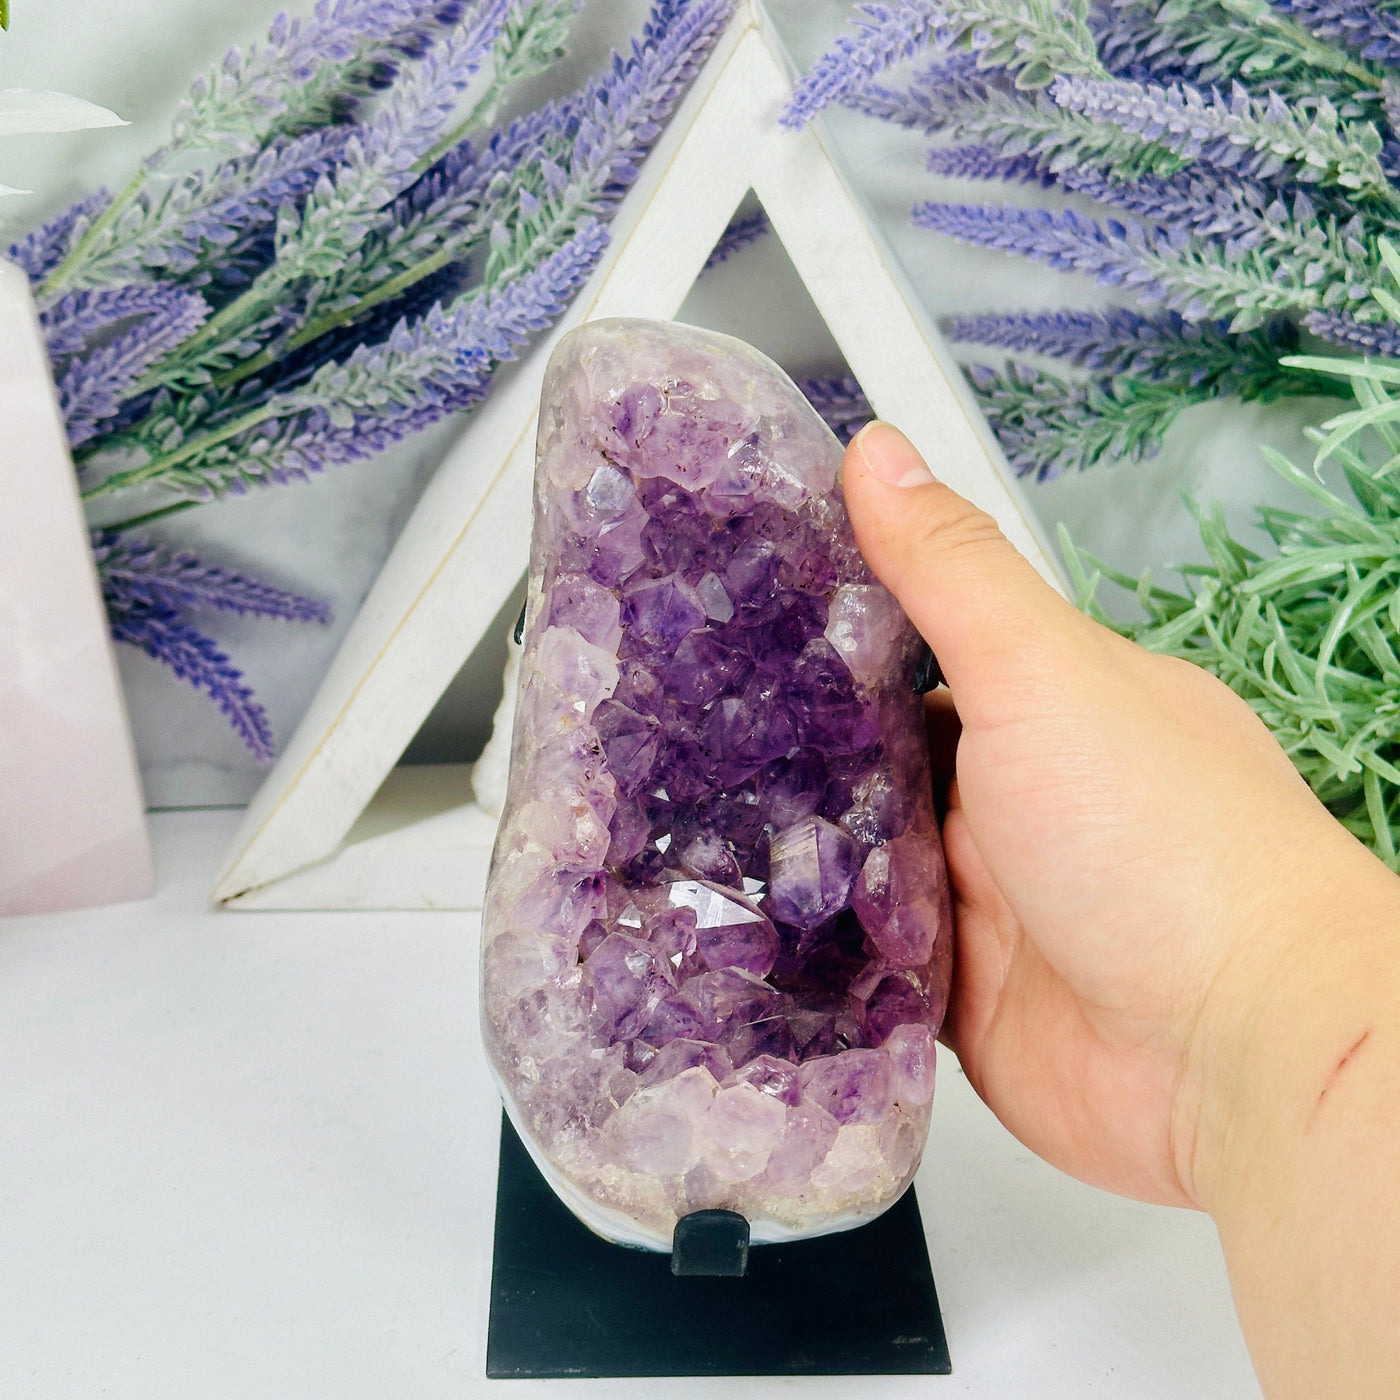 Amethyst Cluster on Black Metal Stand - Polished Crystal Cluster with hand for size reference